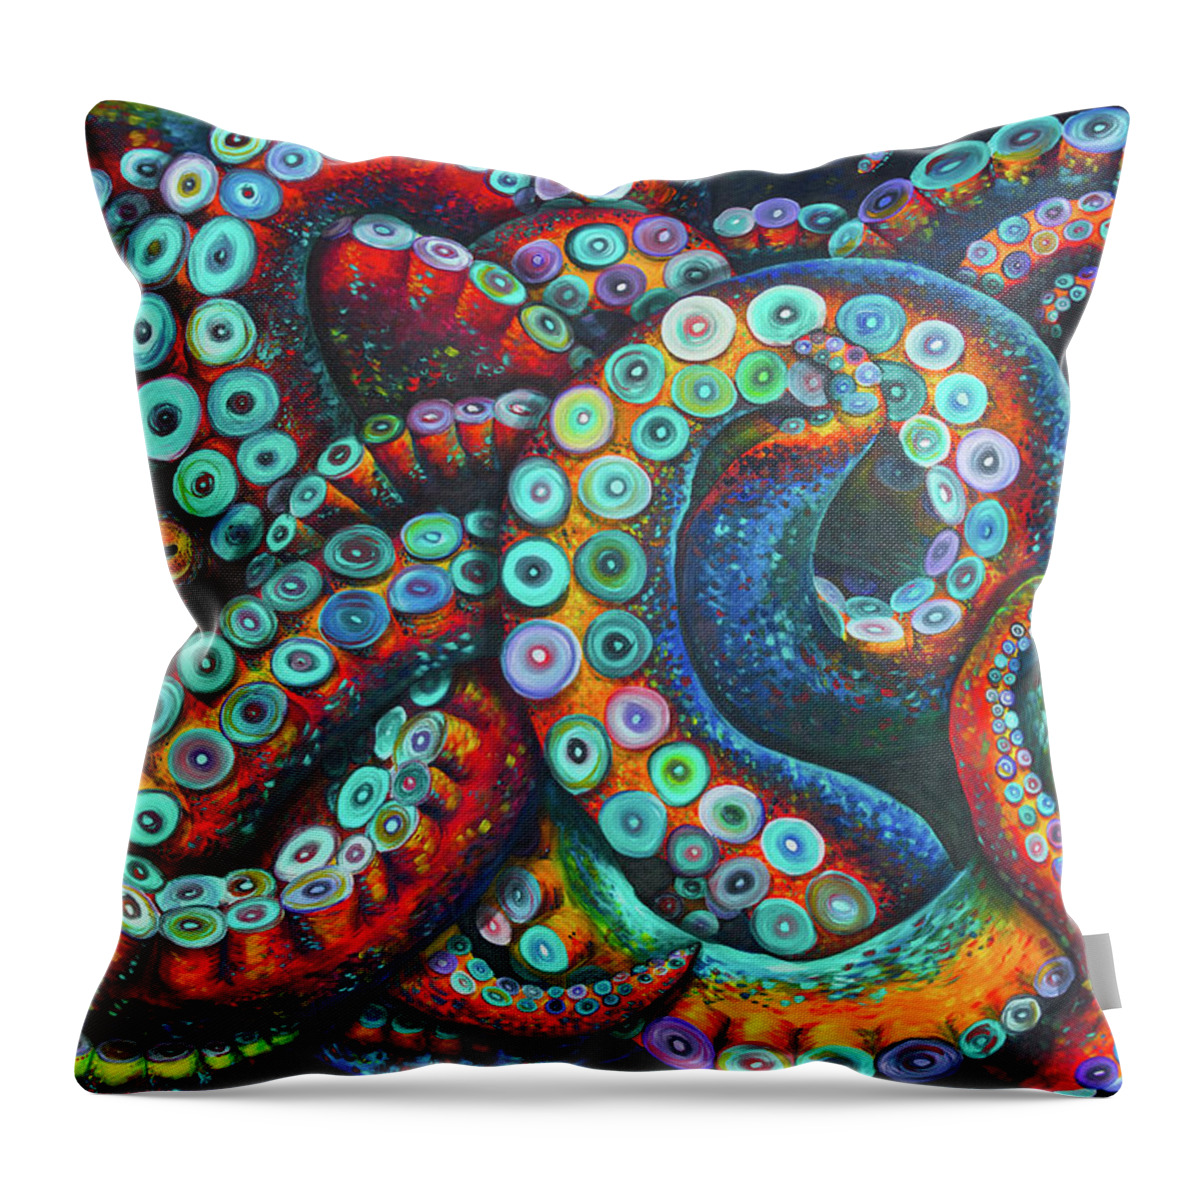 Octopus Throw Pillow featuring the painting Release Me by Madeline Dillner